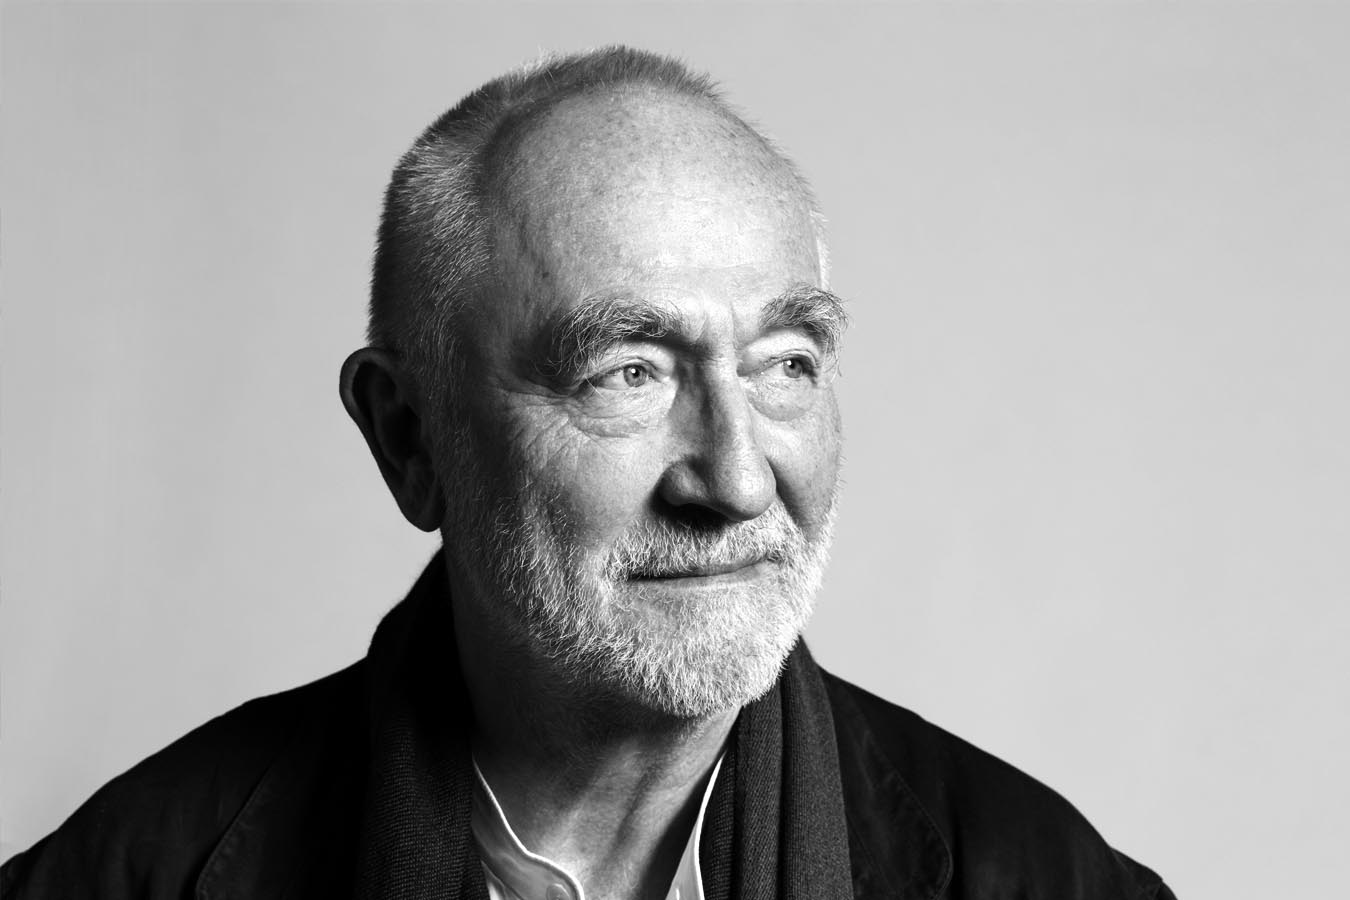 “in order to design buildings with a sensuous connection to life, one must think in a way that goes far beyond form and construction. ” - peter zumthor